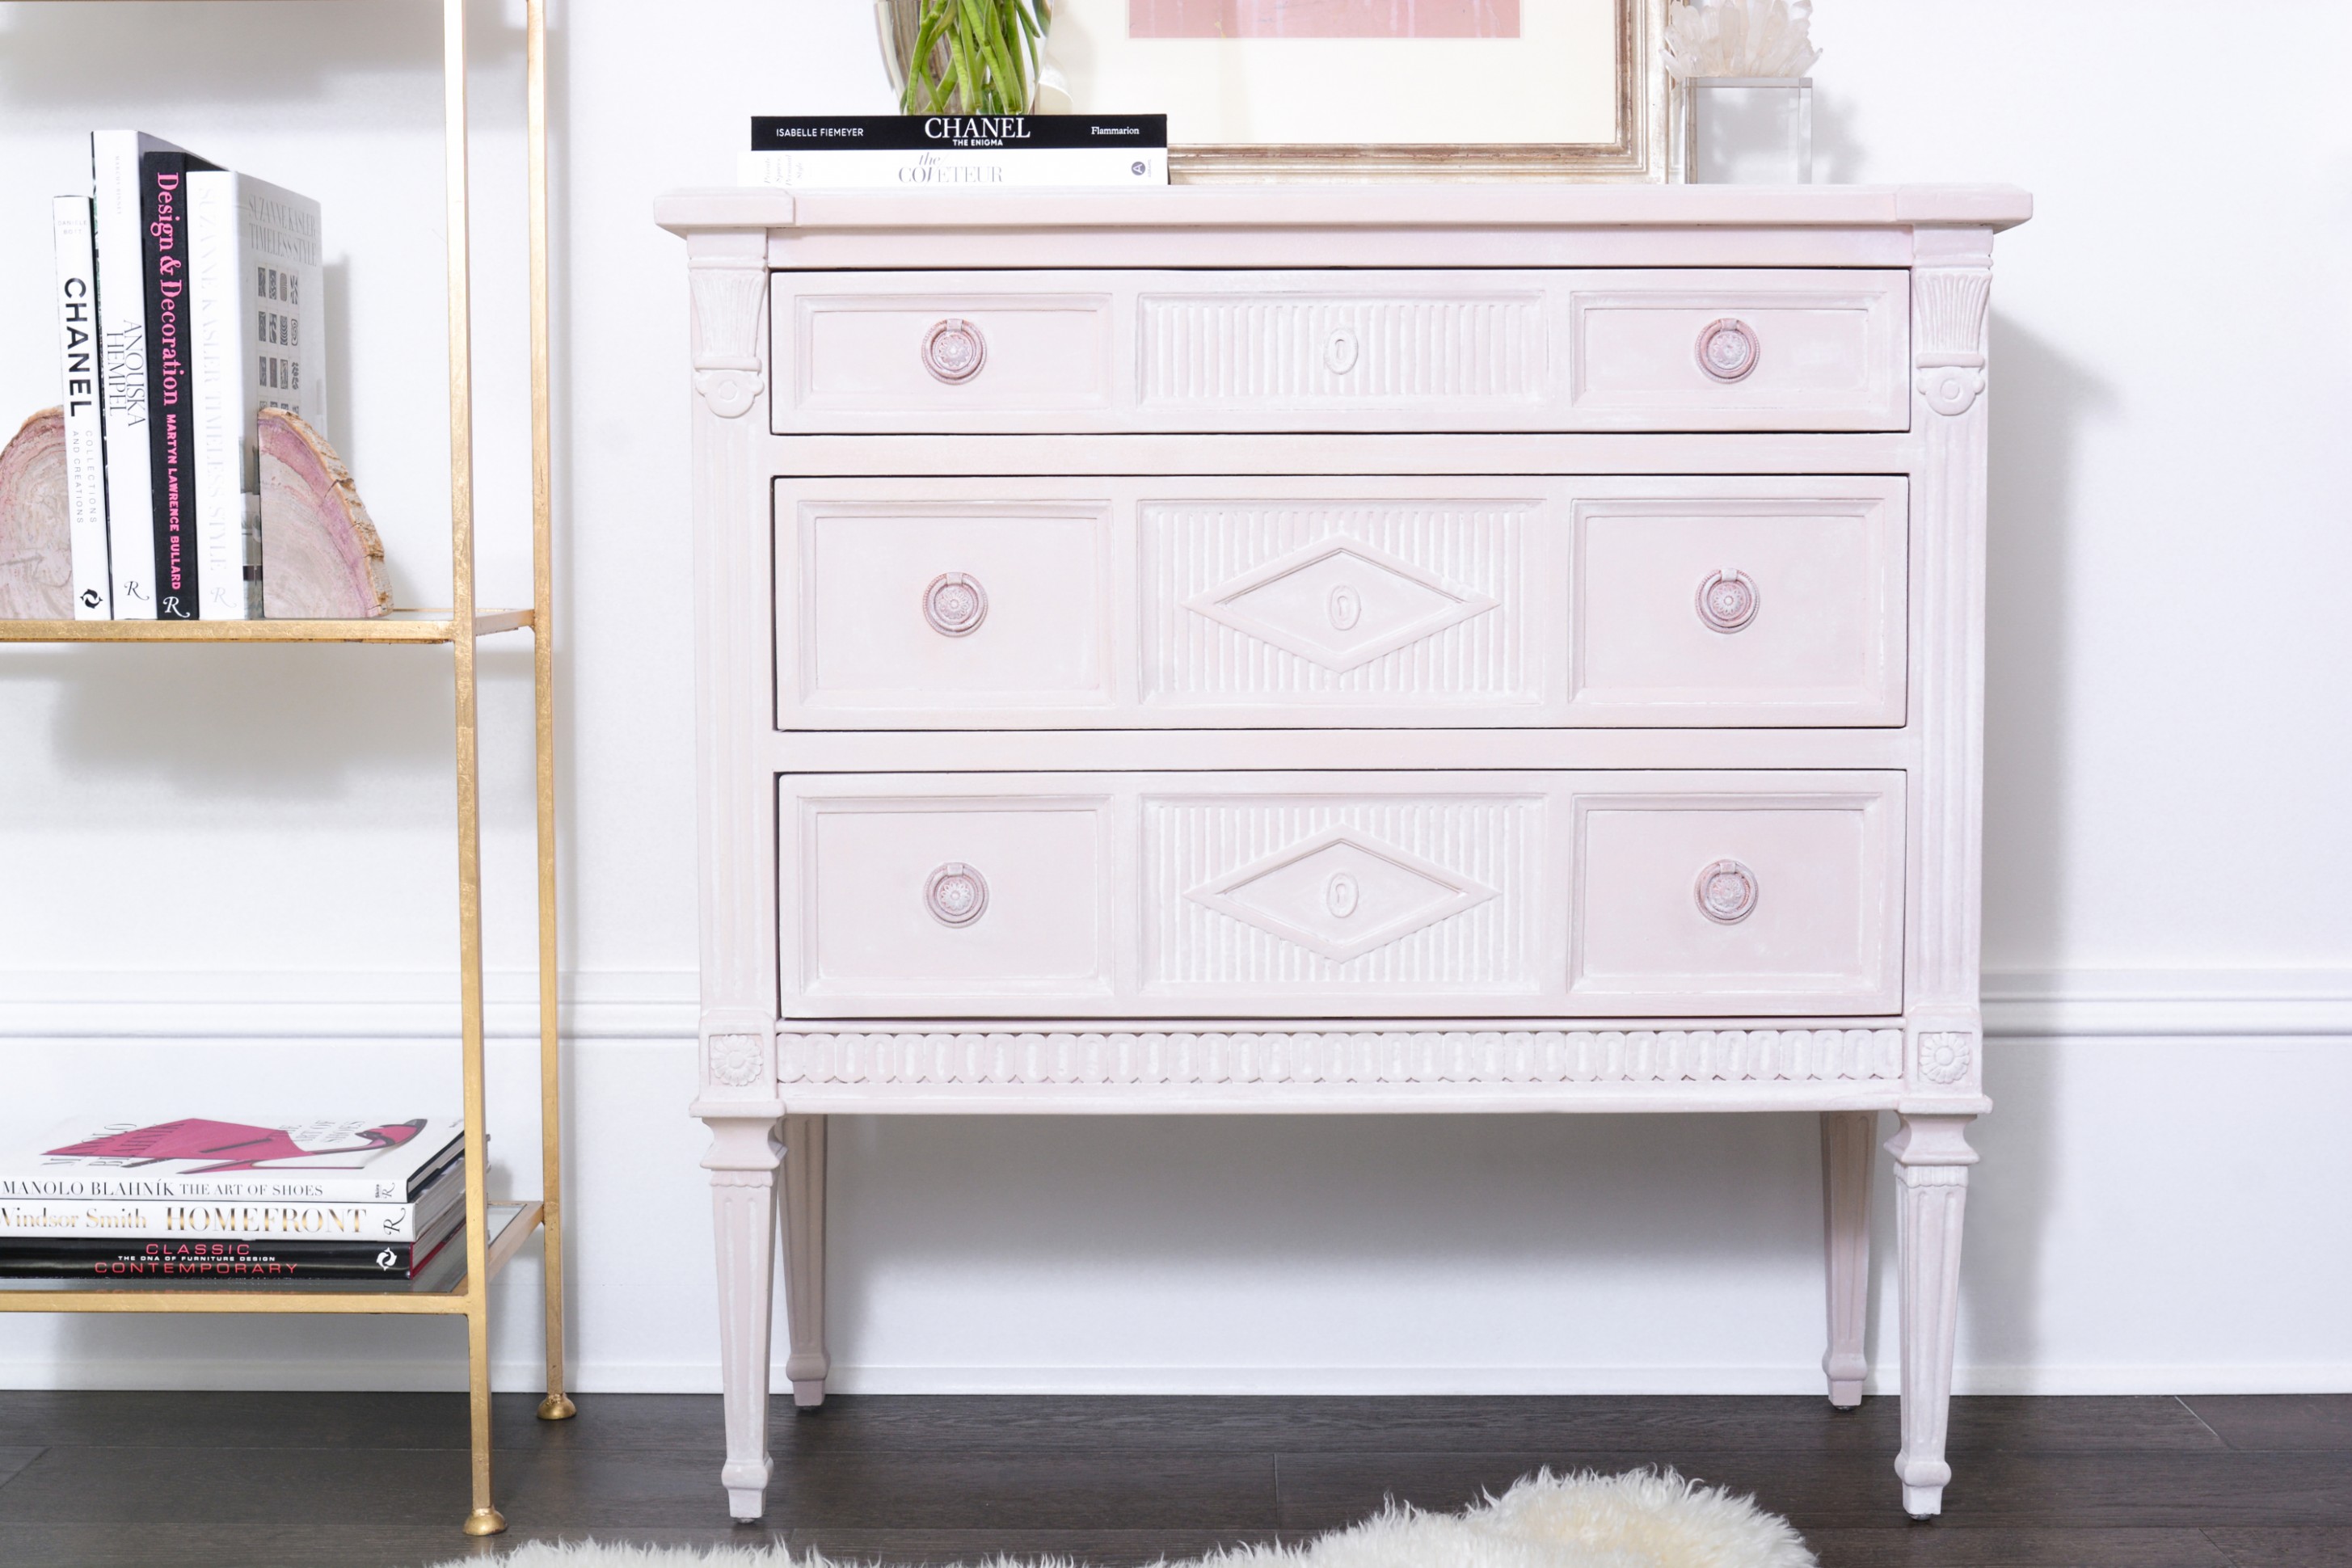 Upcycling Furniture Made Simple With New Jolie Paint The ..